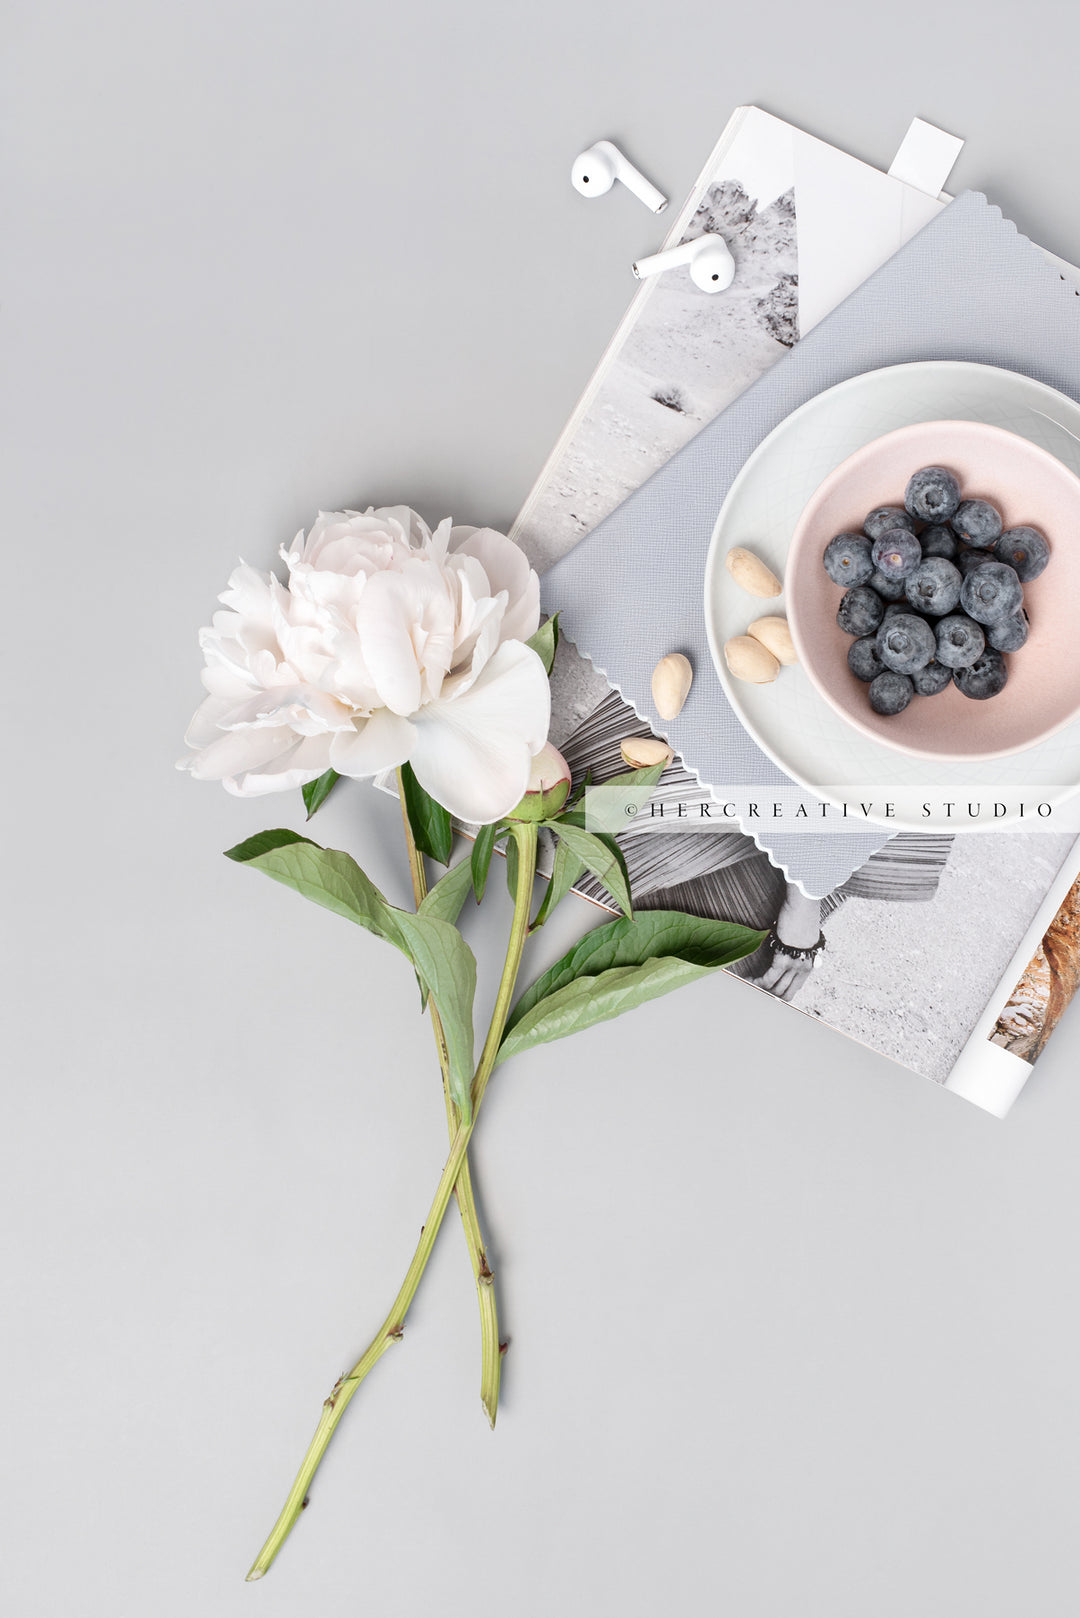 Peony and Bluberries on Grey Workspace. Stock Image